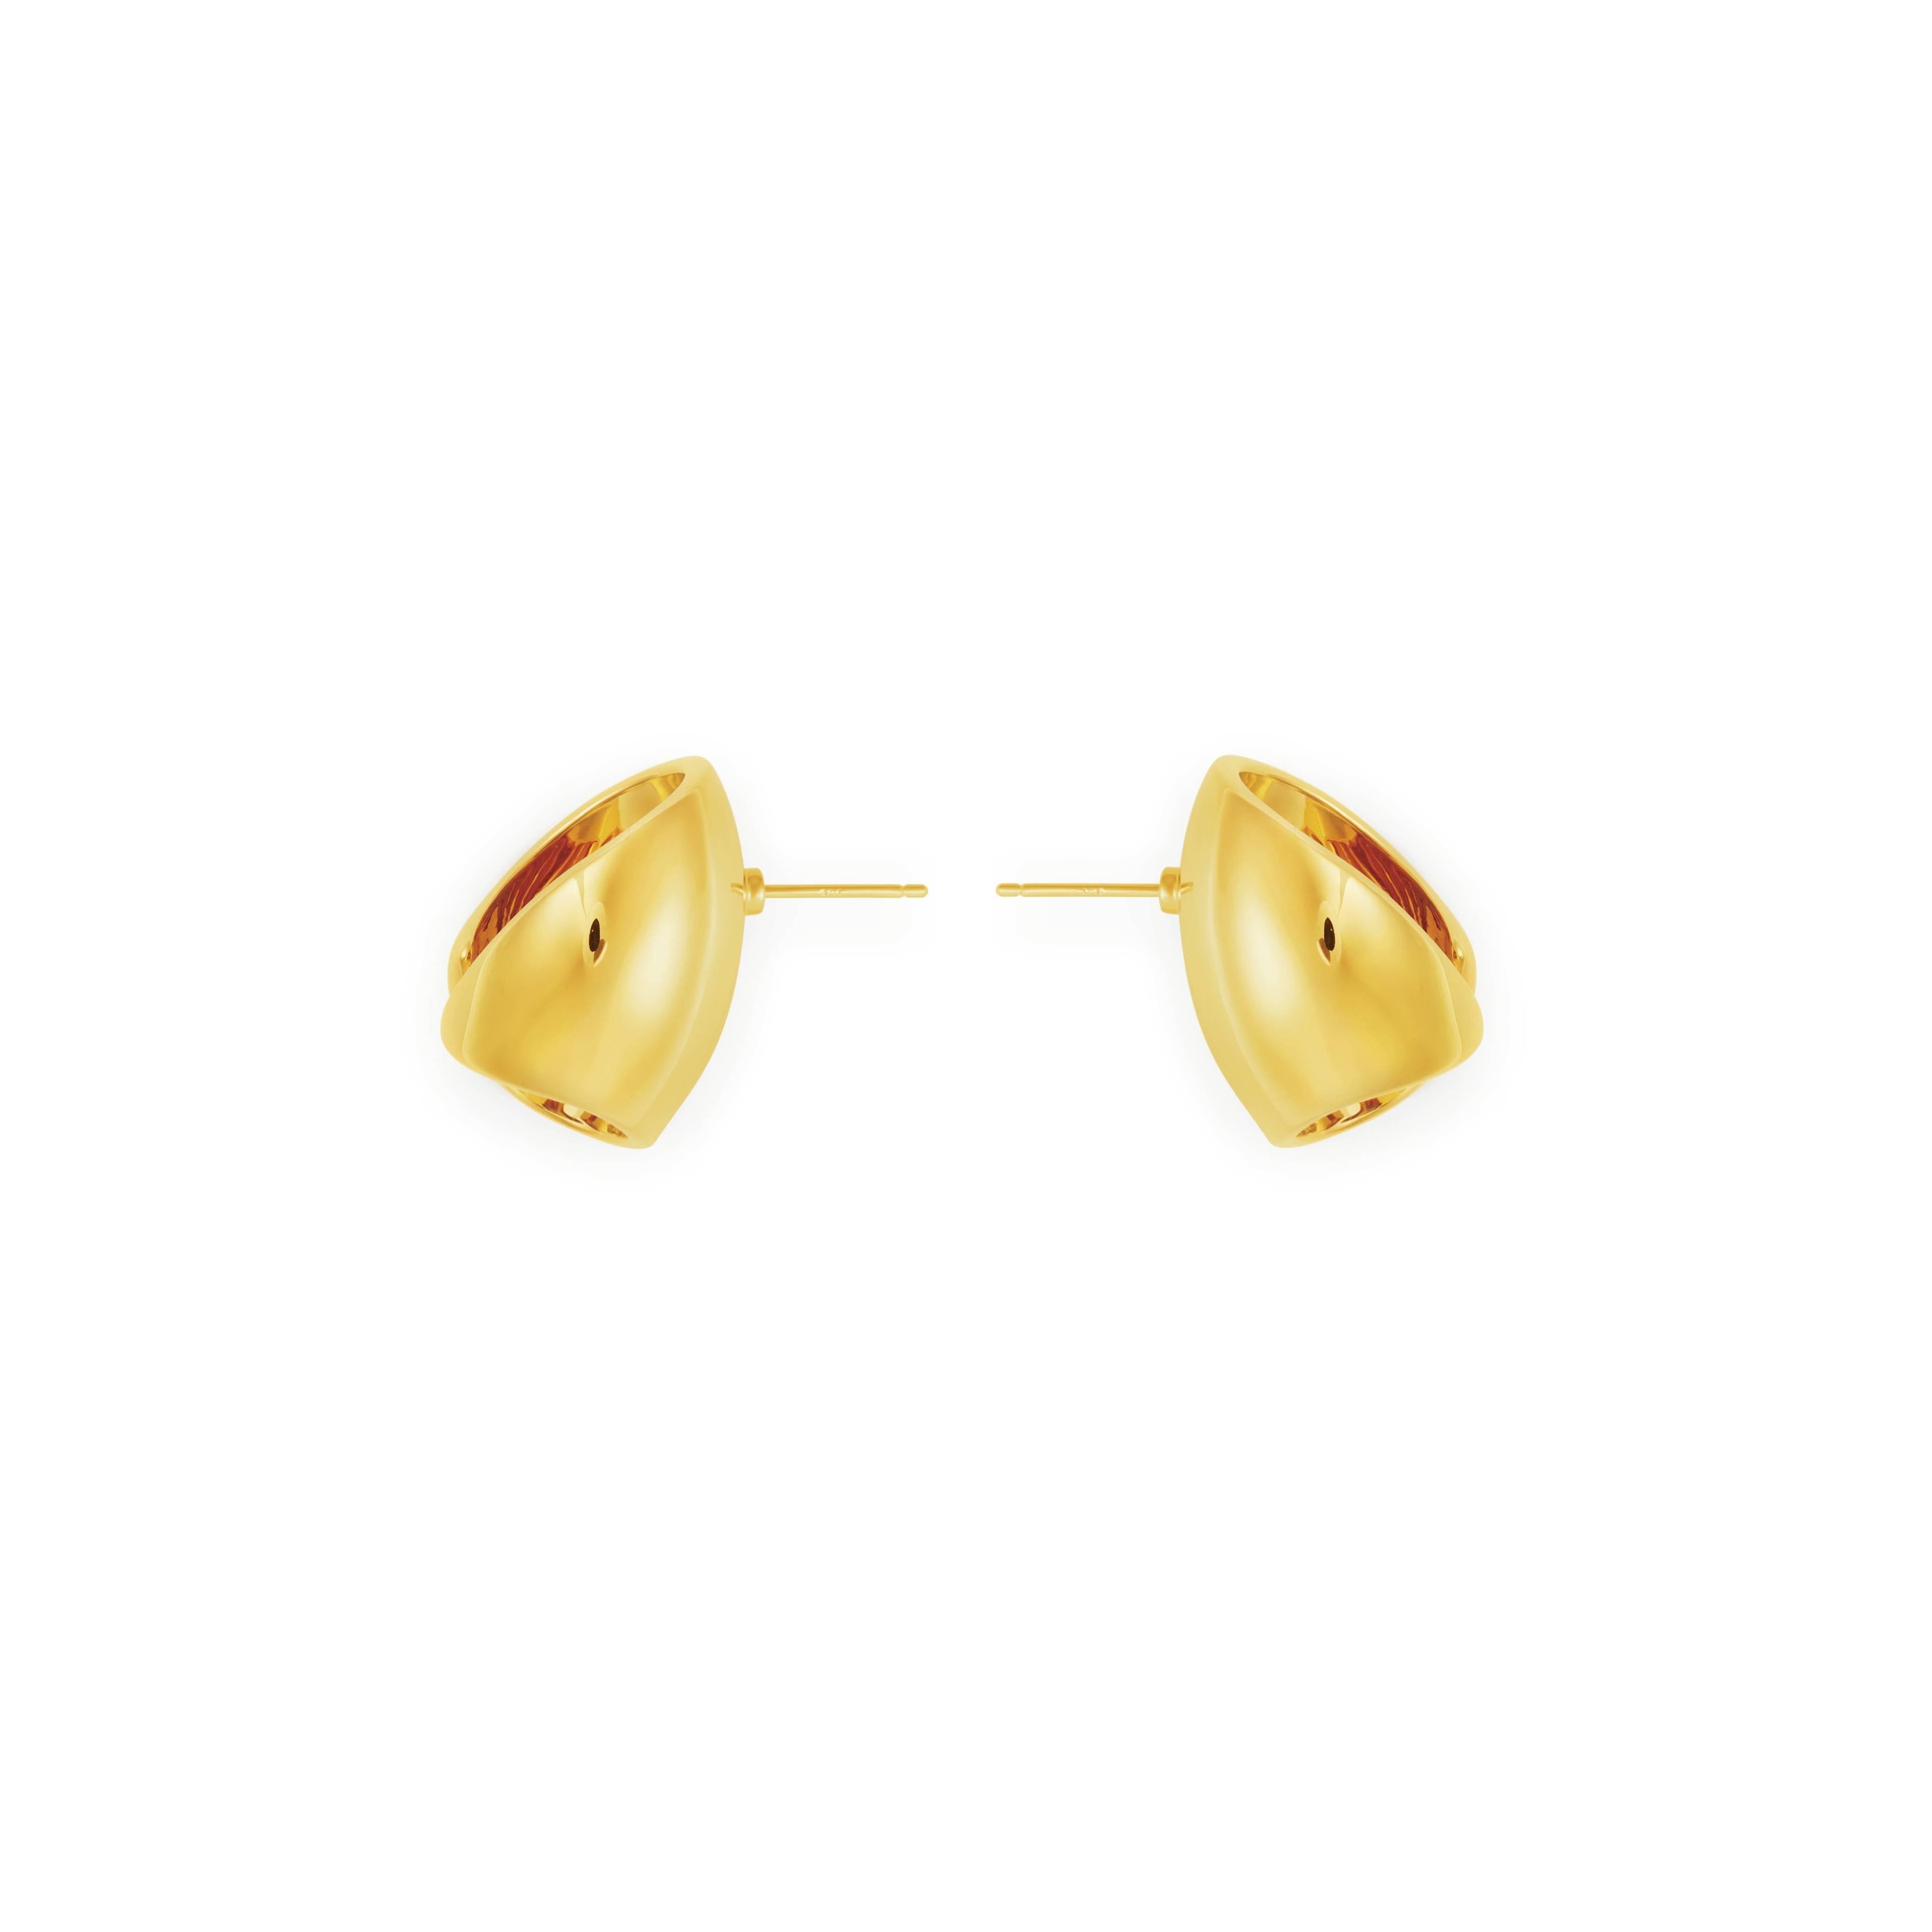 Positron Earrings made from the finest 18k Gold. A statement piece which is easy to wear. The earrings are made from solid 18K gold, have a nice weight and have a modernist sculptural form. 